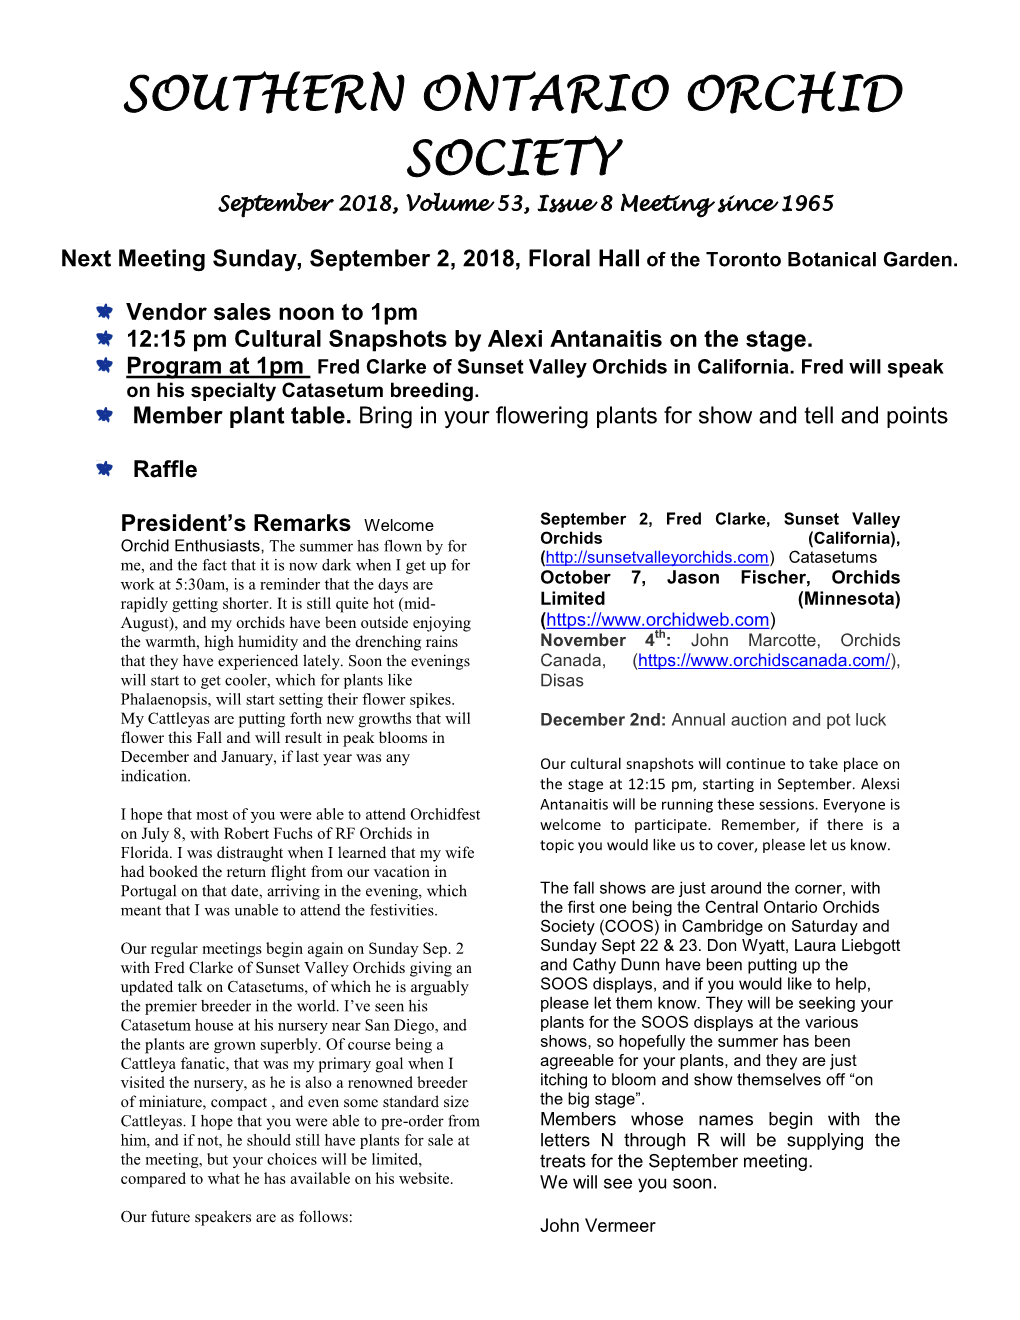 SOUTHERN ONTARIO ORCHID SOCIETY September 2018, Volume 53, Issue 8 Meeting Since 1965